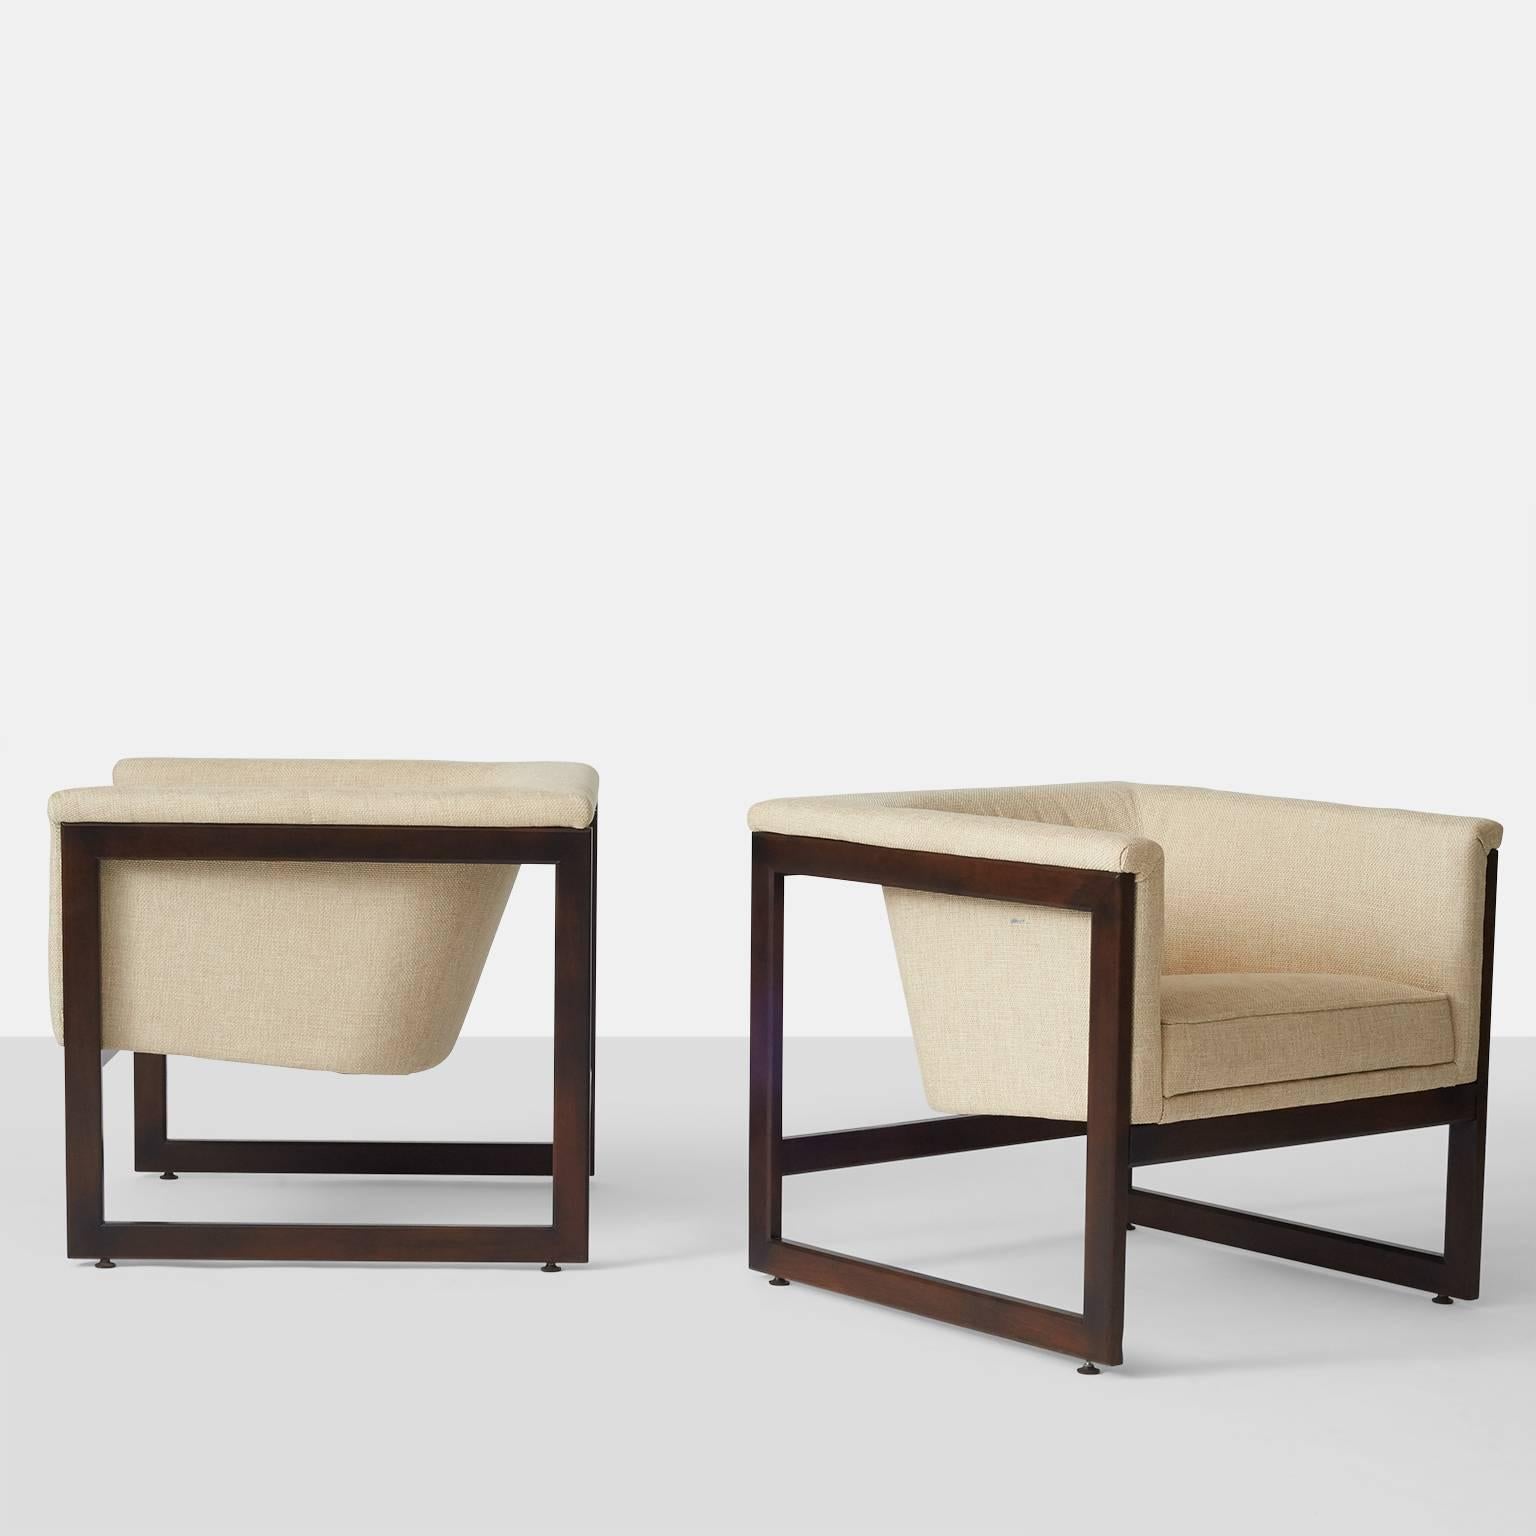 A pair of Milo Baughman floating cube lounge chairs with wooden frame and upholstered seat in a ivory woven fabric.  Recently restored.